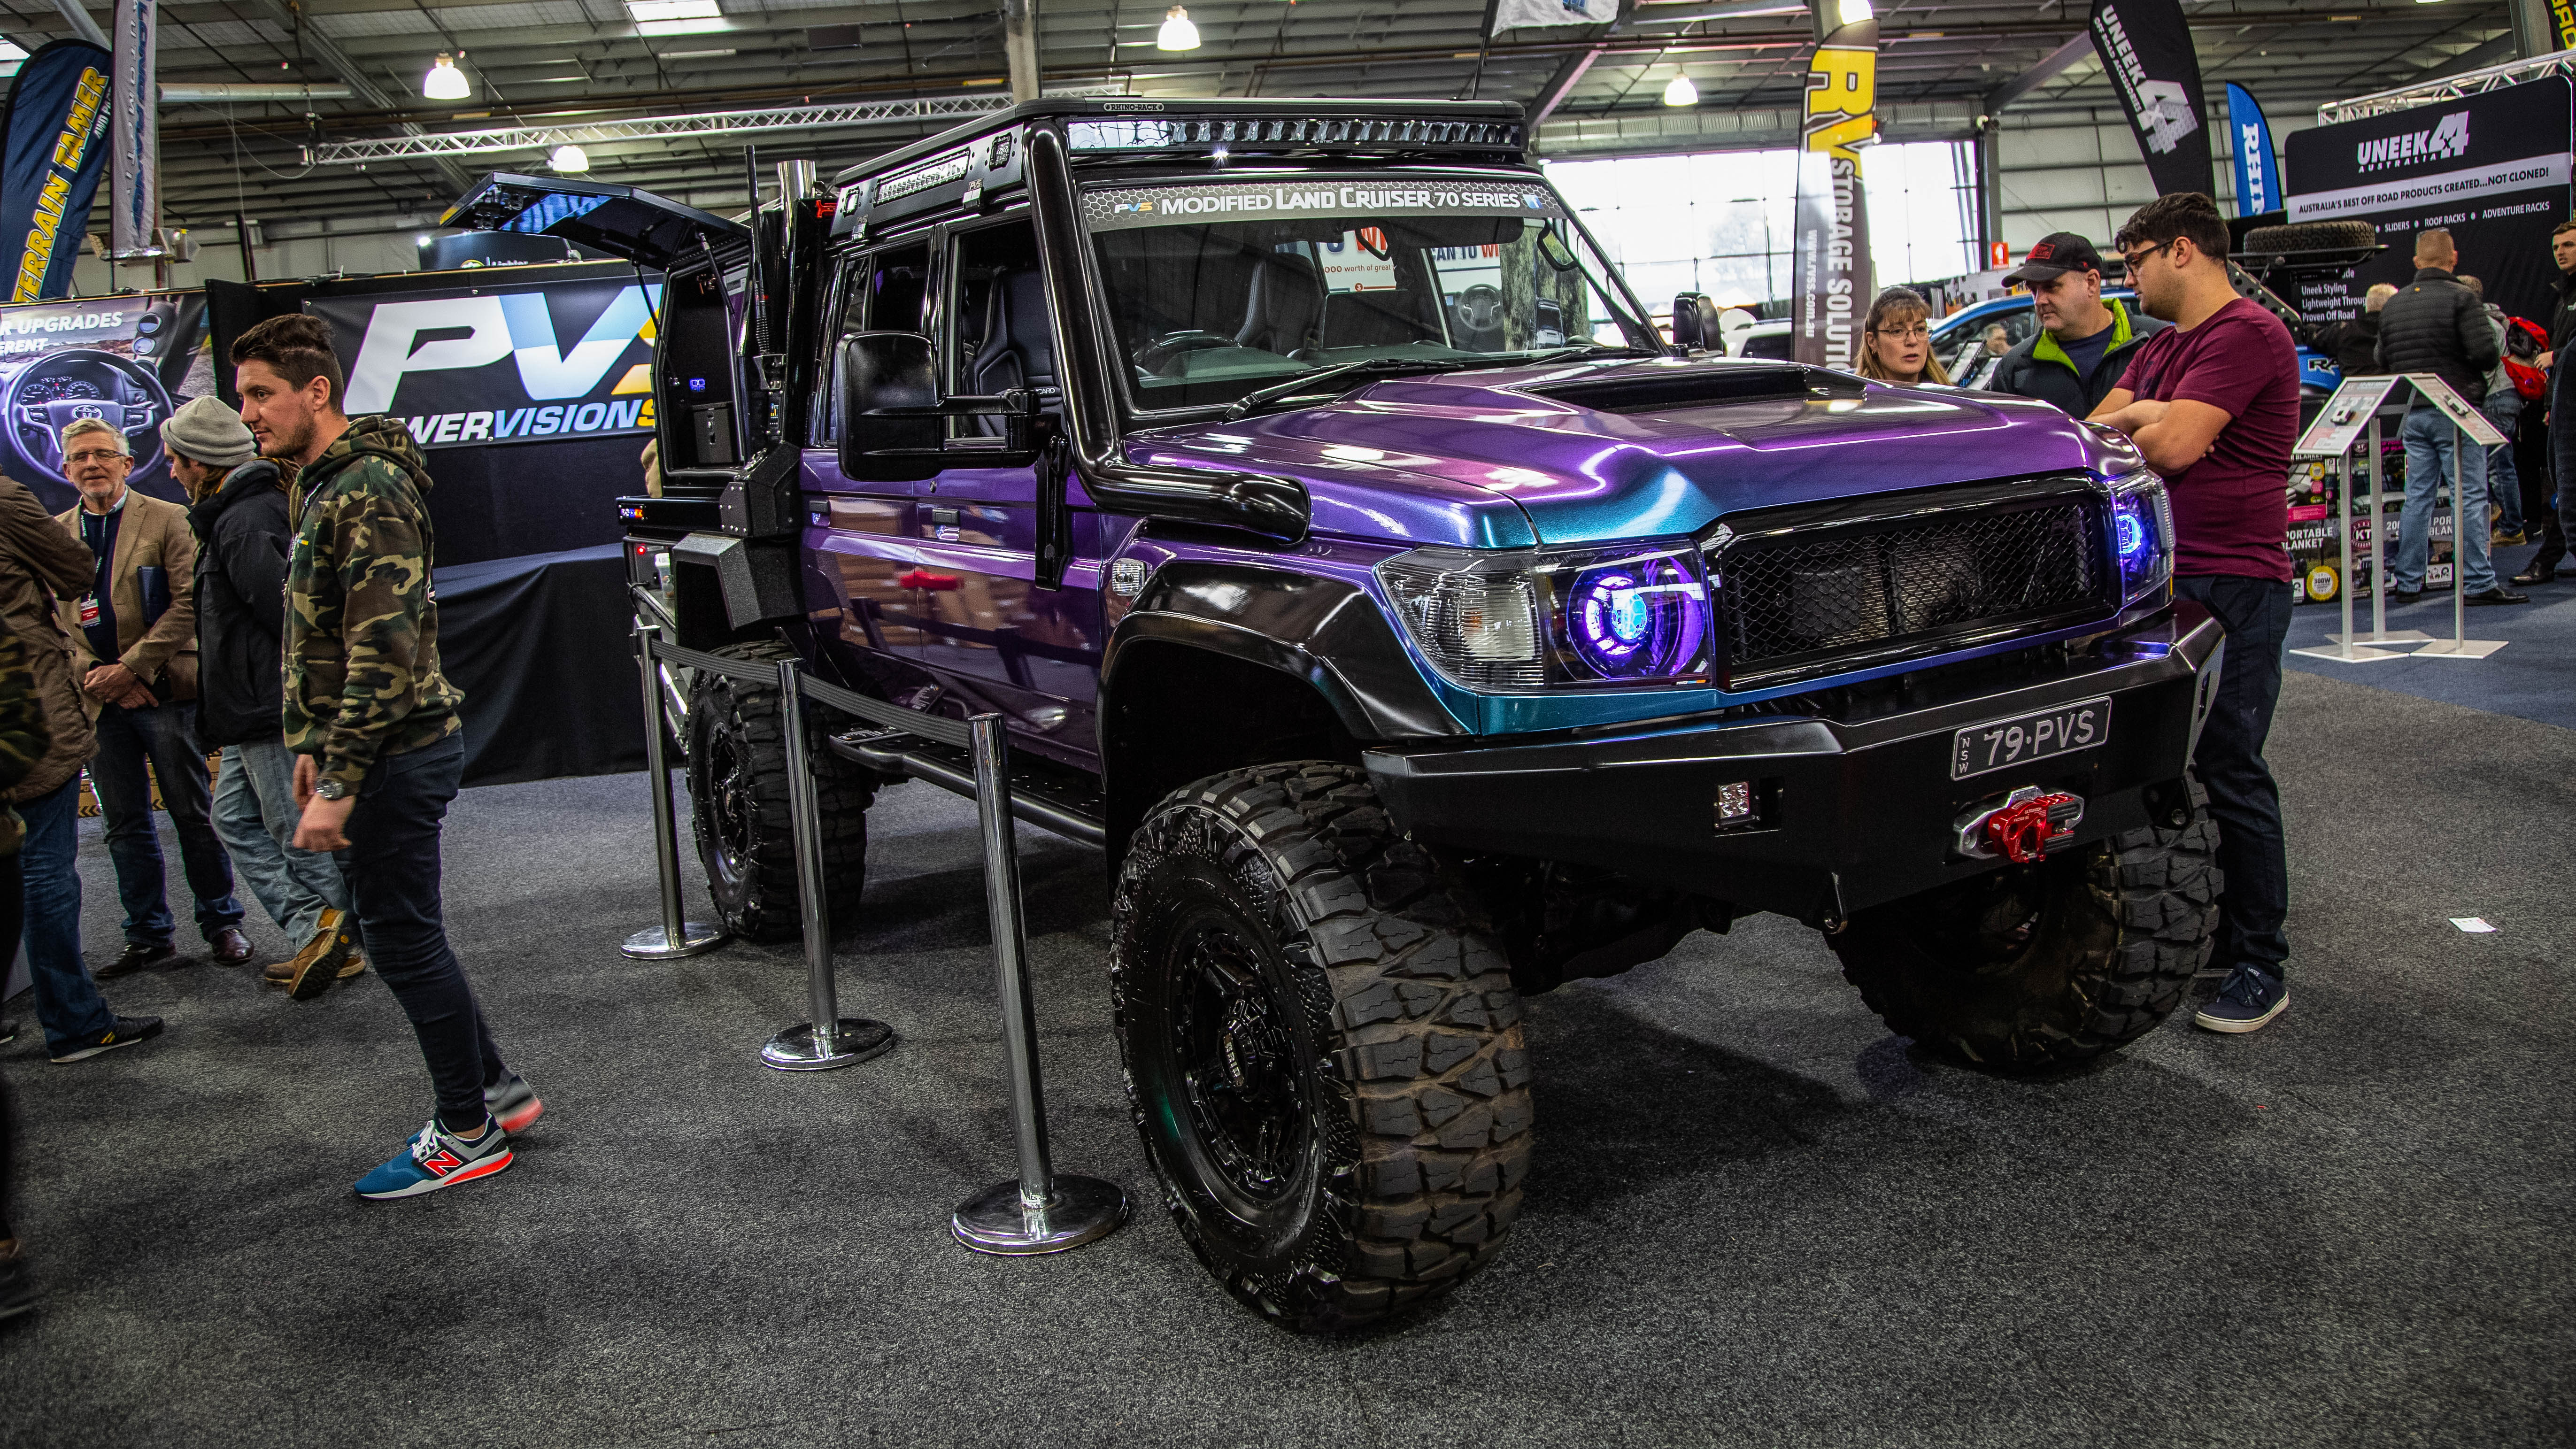 The 79 Series Landcruisers Of The Melbourne 4x4 Show Caradvice